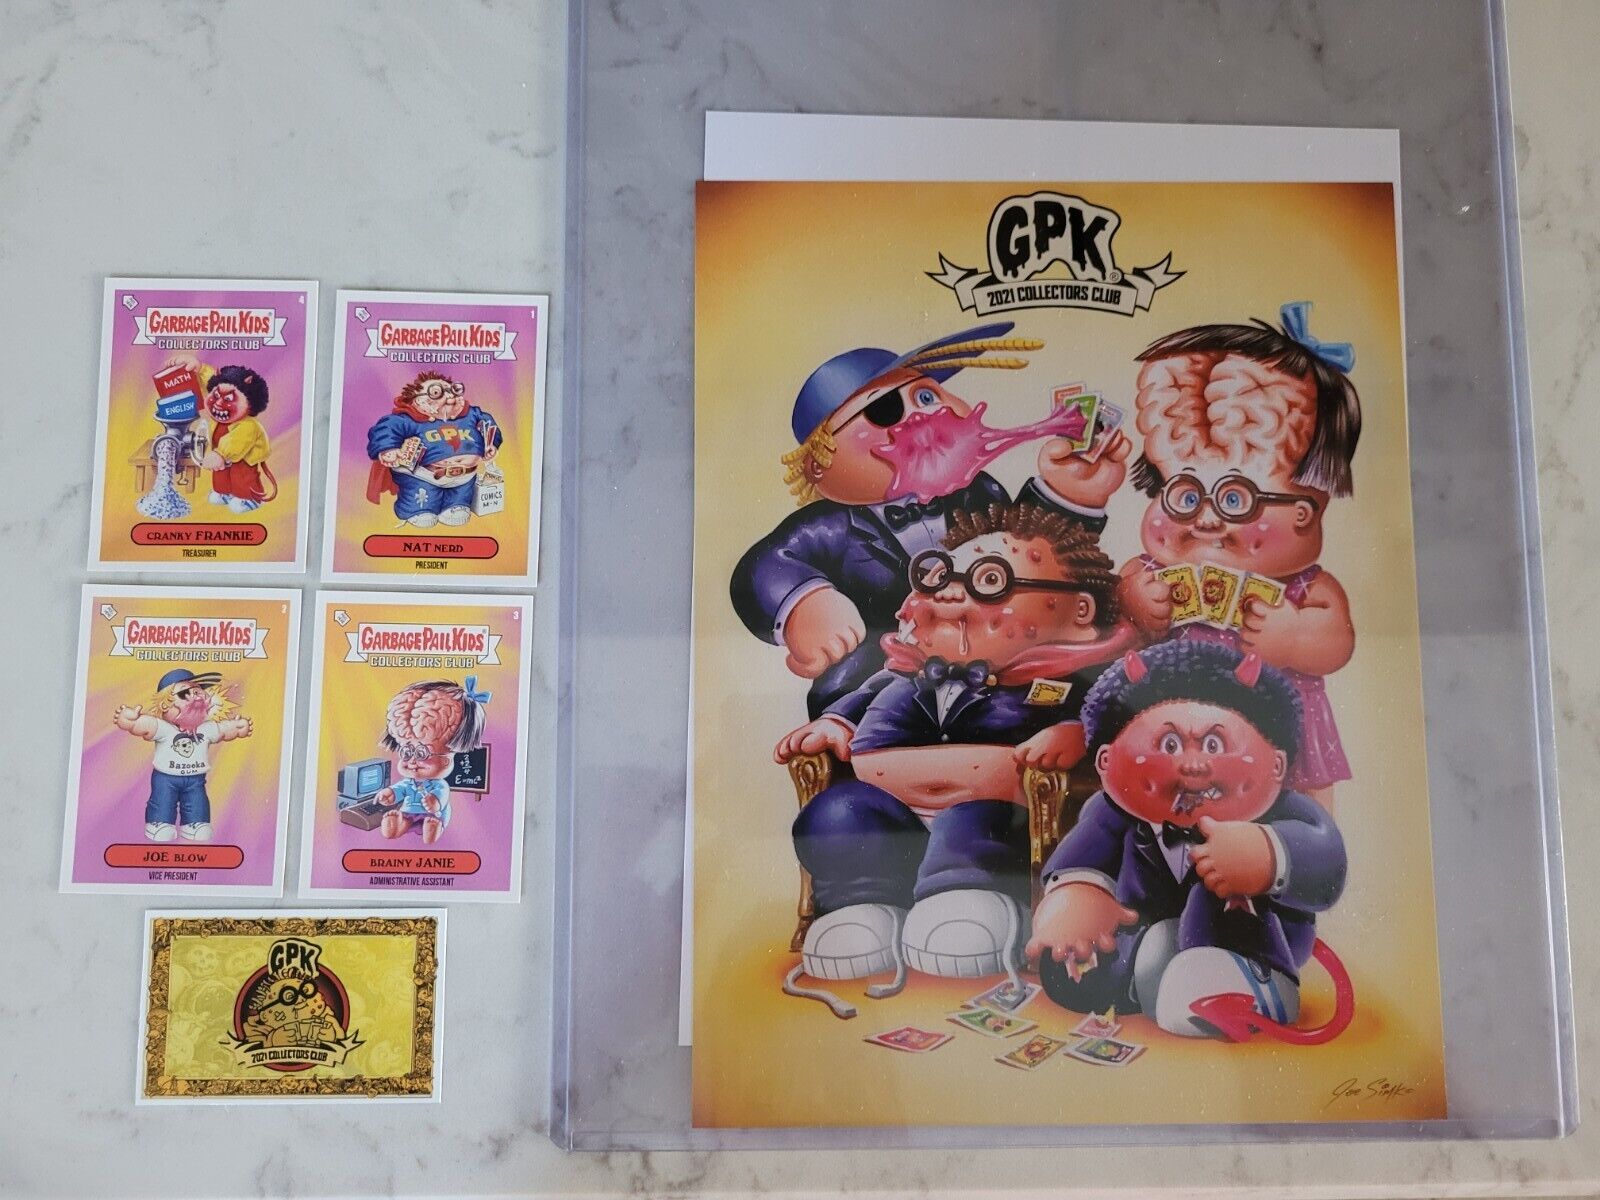 2021 Topps GPK Collector's Club Set #1 Trash Can Didates 4 Cards Membership ID